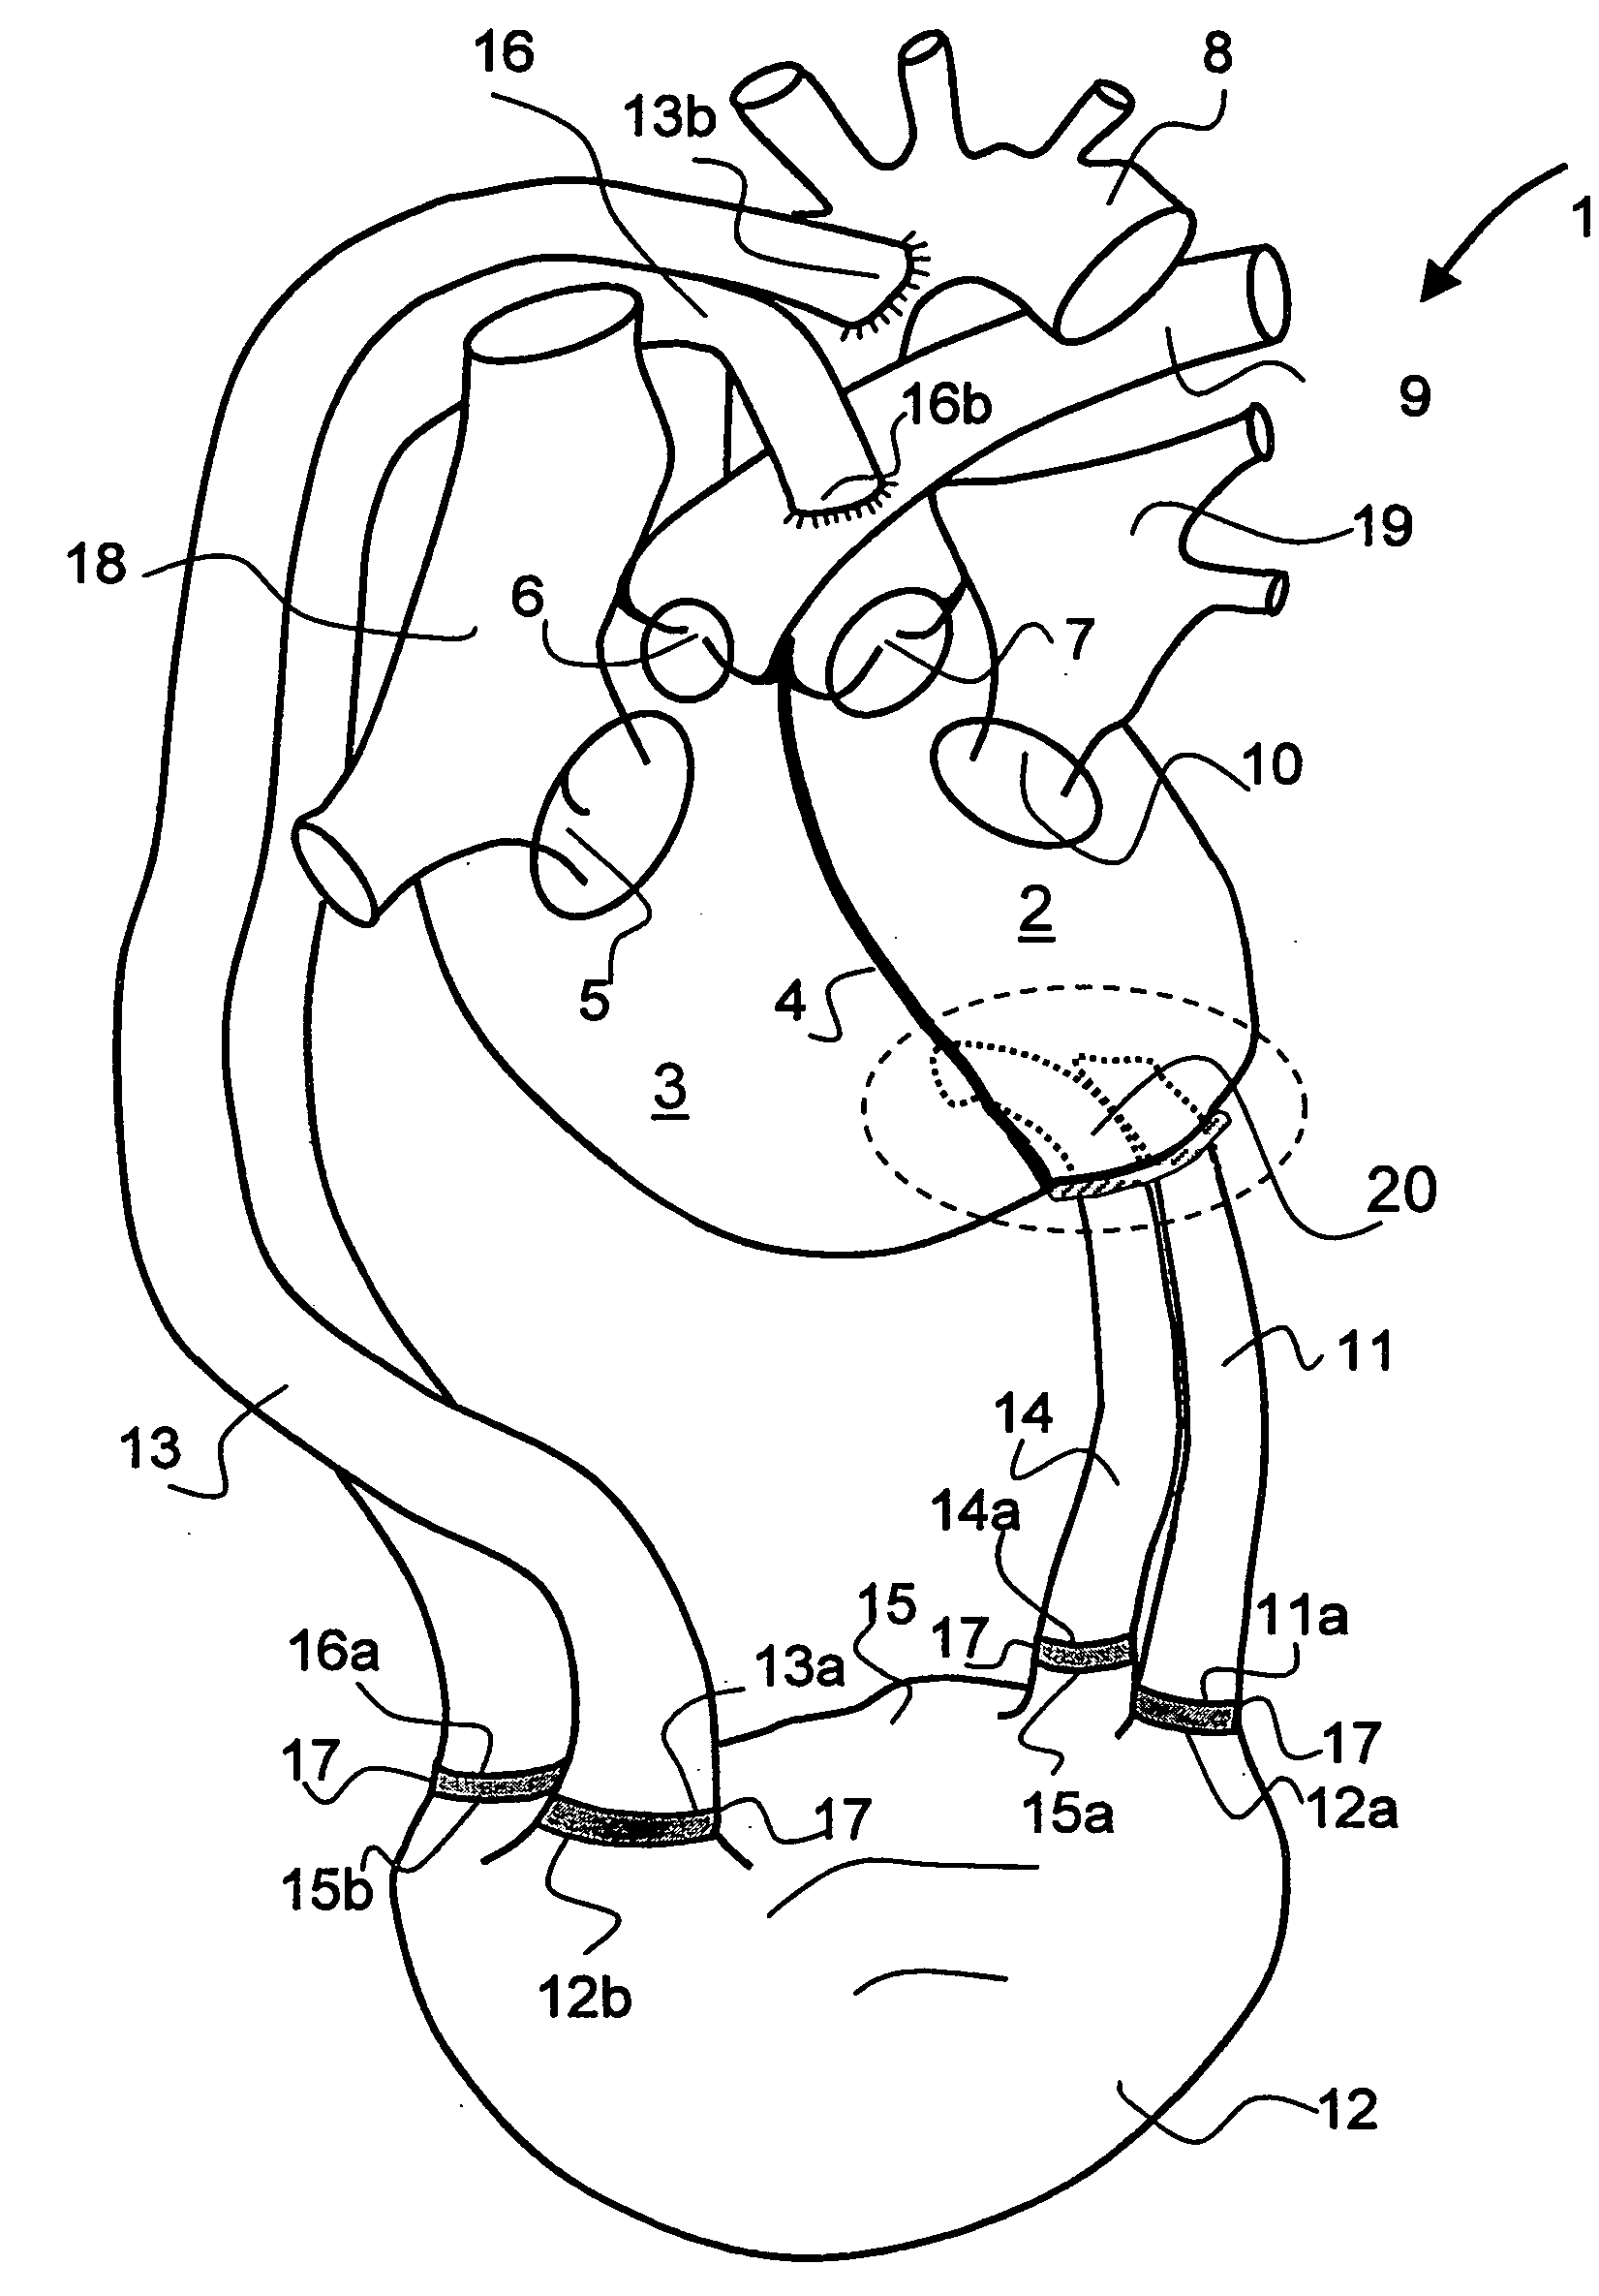 Device for connecting a cardiac biventricular assist means